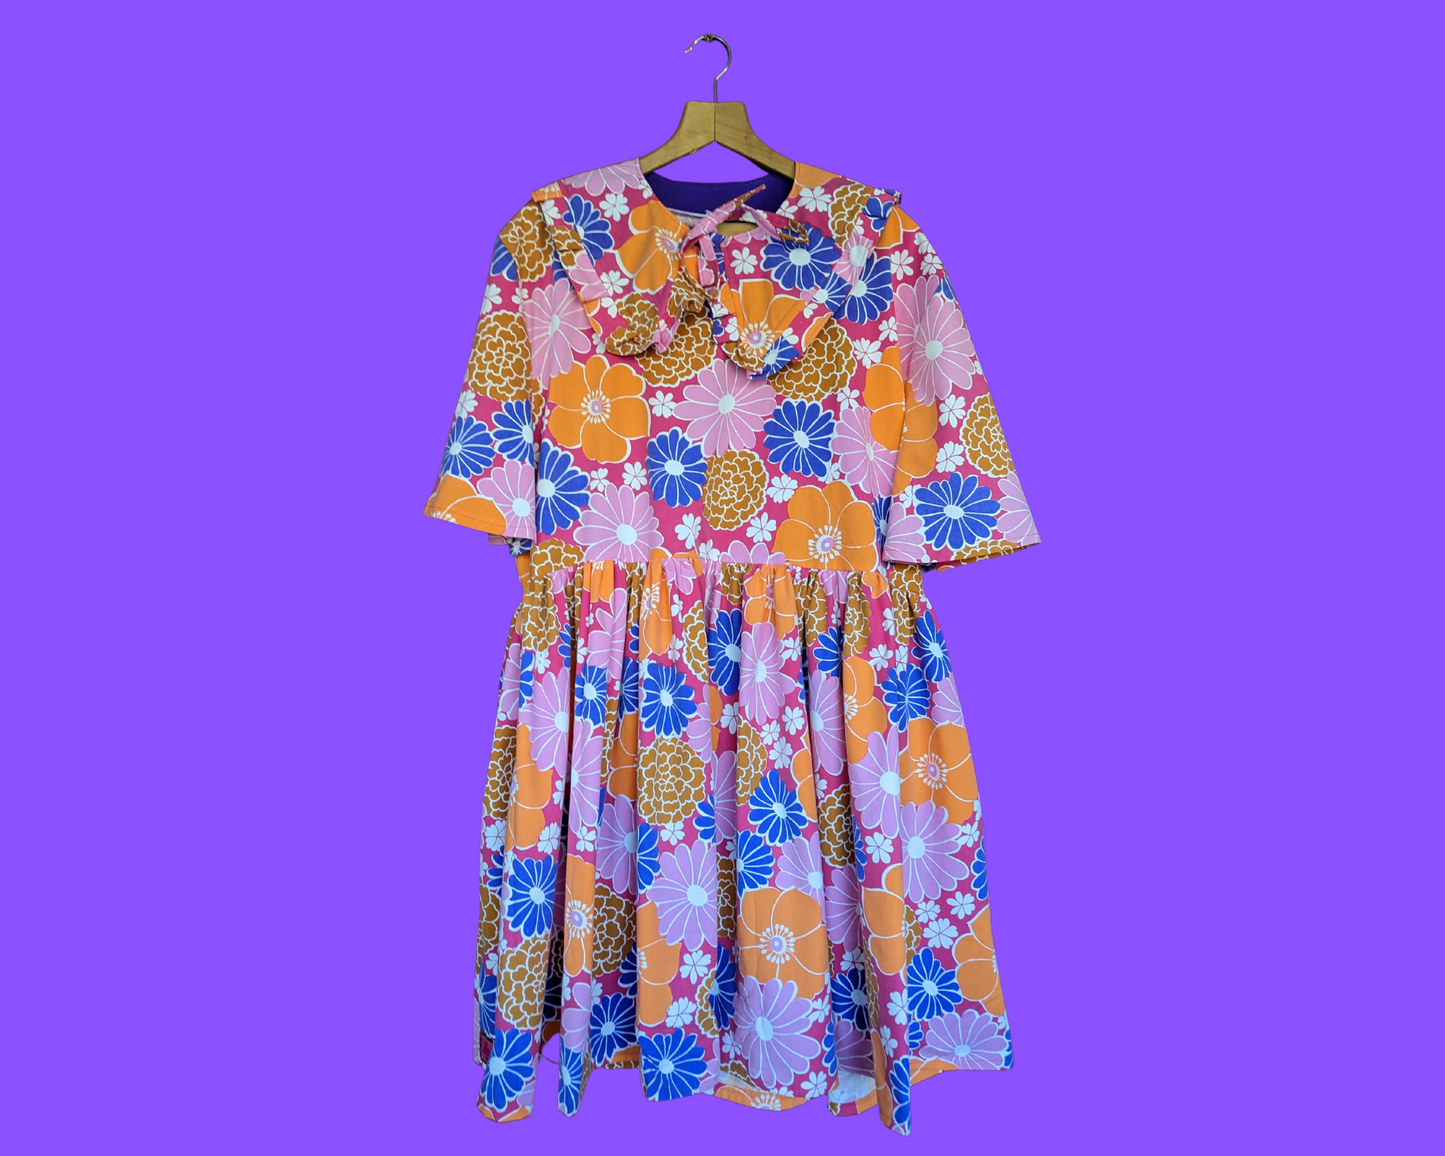 Handmade, Upcycled Vintage 1960's Pink, Purple and Orange Floral Bedsheet Dress with Matching Detachable Collar Size 3XL